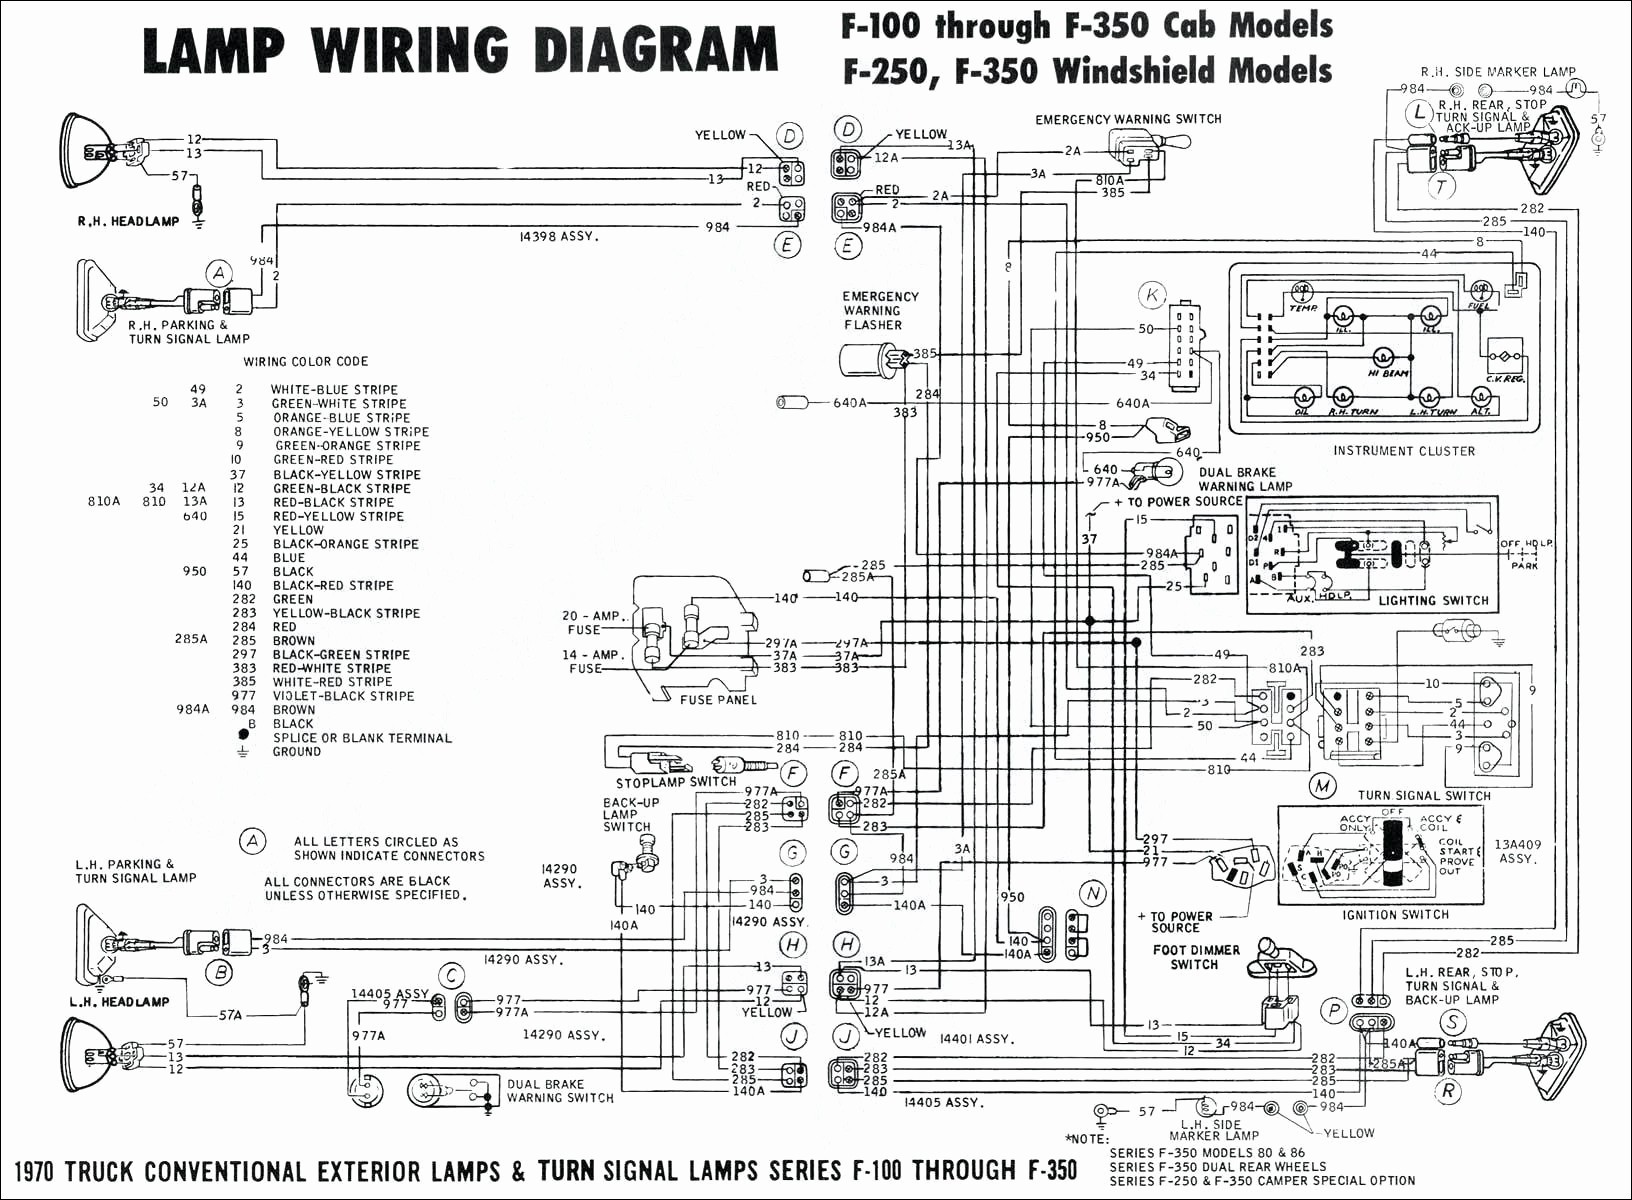 Briggs and Stratton Ignition Coil Wiring Diagram Book Briggs and Stratton Coil Wiring Diagram Best